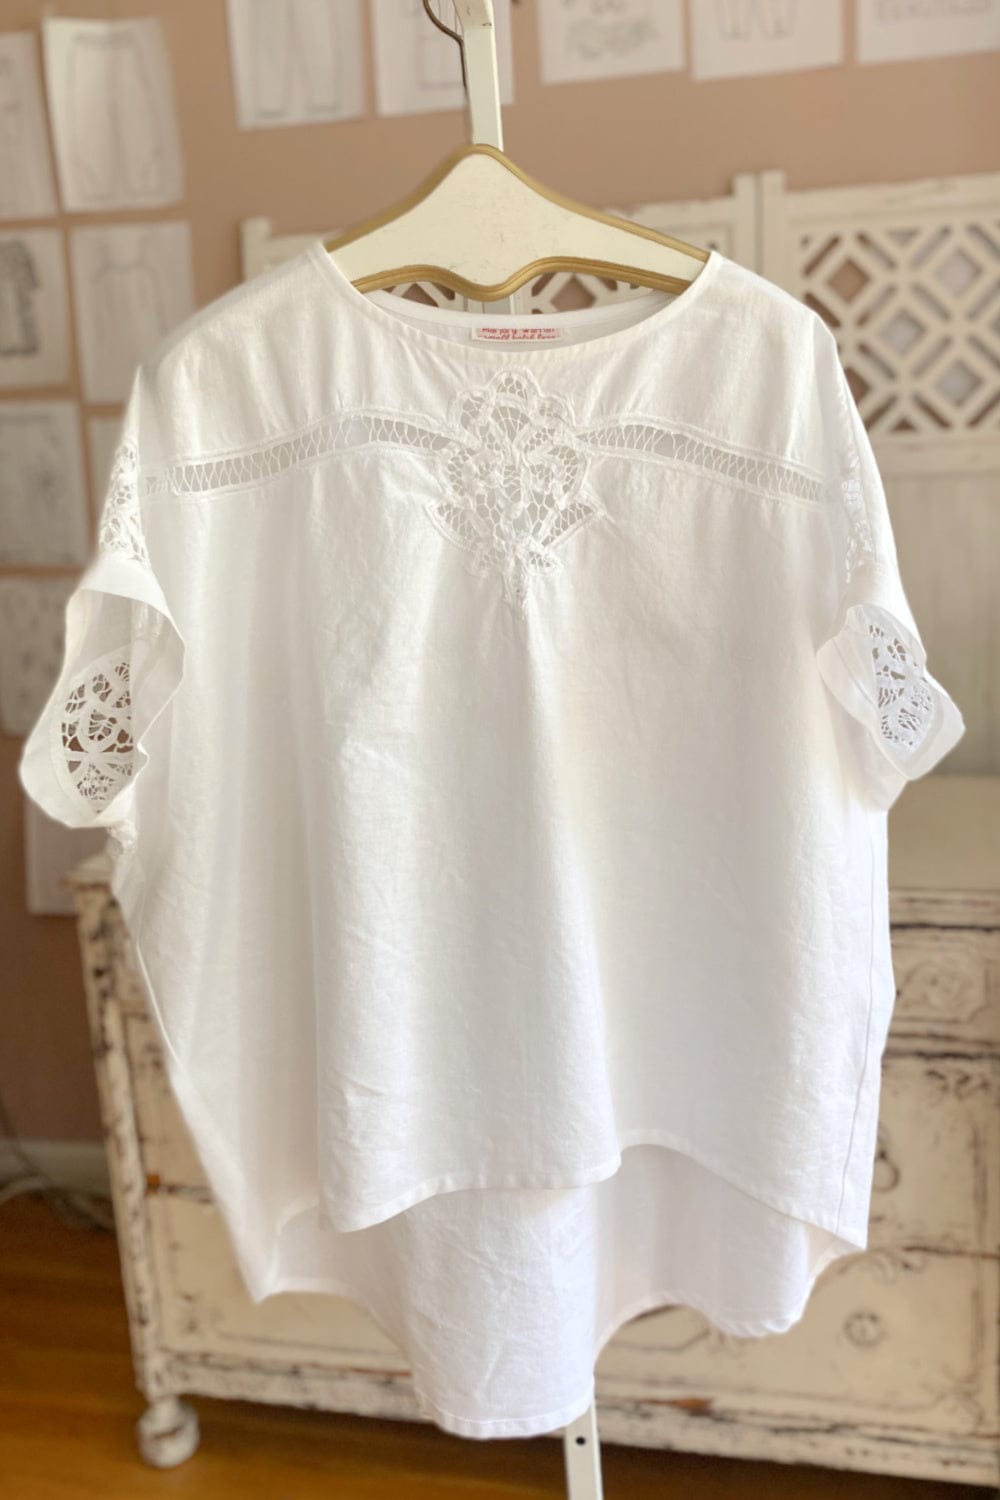 Short sleeve women's cotton top with decorative stitchig and a curved hemline.